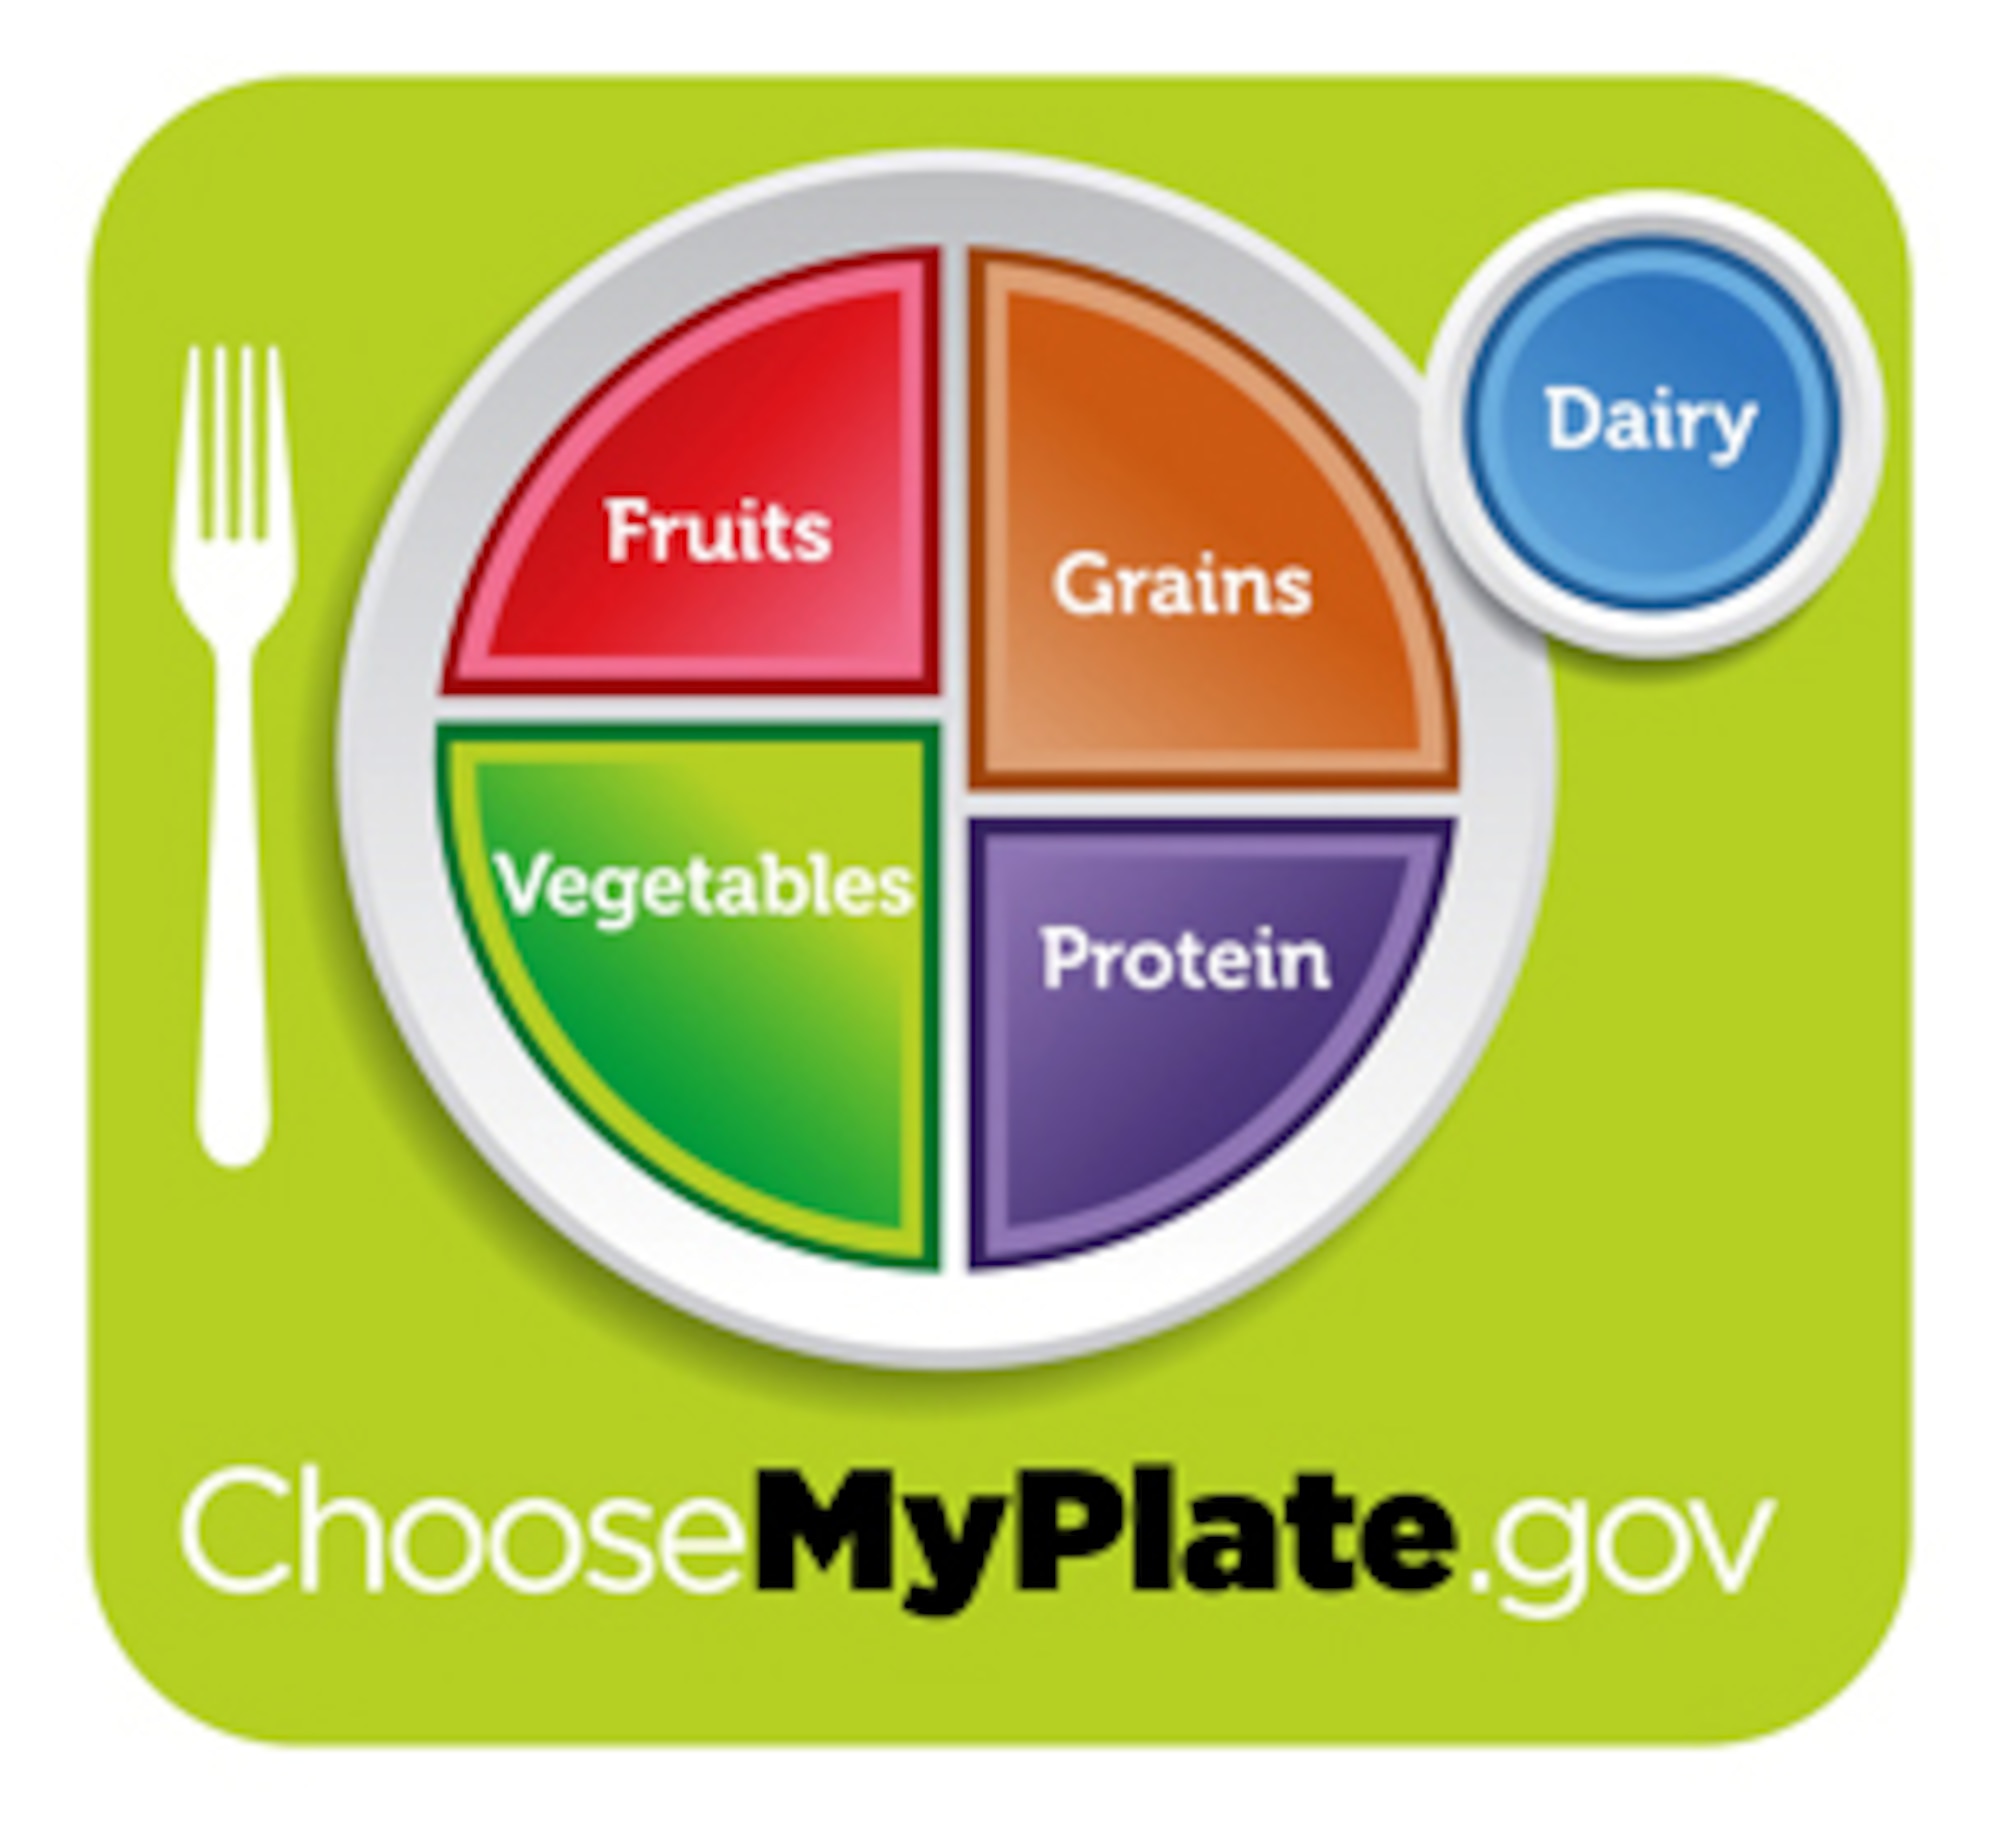 The new MyPlate food guide icon has replaced the pyramid for promoting healthier food choices and portion sizes. (U.S. Department of Agriculture graphic)